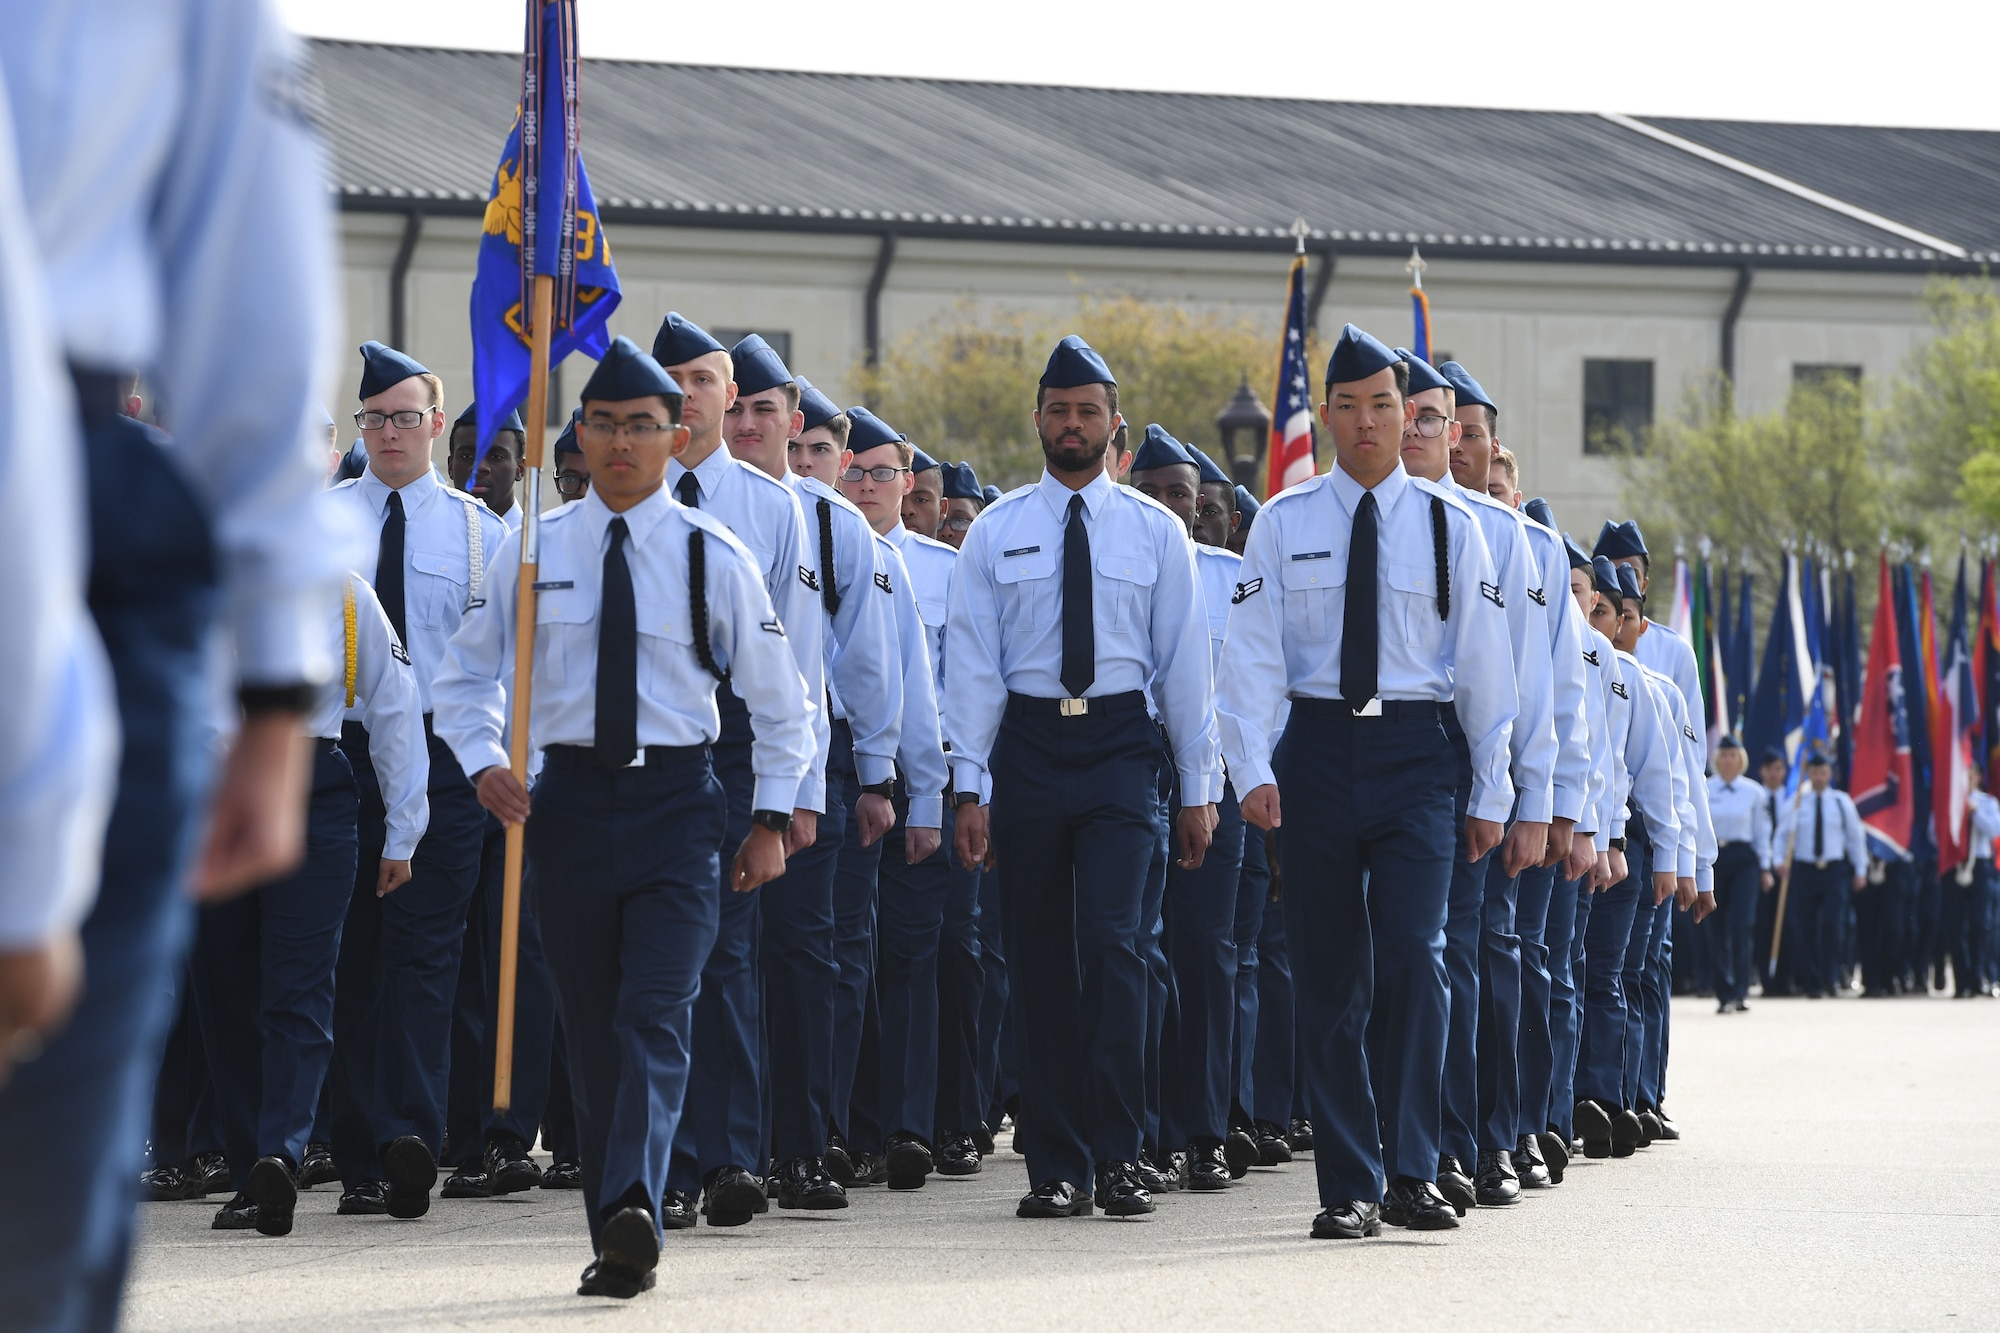 Airmen from the 81st Training Group march in formation  during the 81st Training Wing assumption of command ceremony on the Levitow Training Support Facility drill pad at Keesler Air Force Base, Mississippi, March 23, 2023.